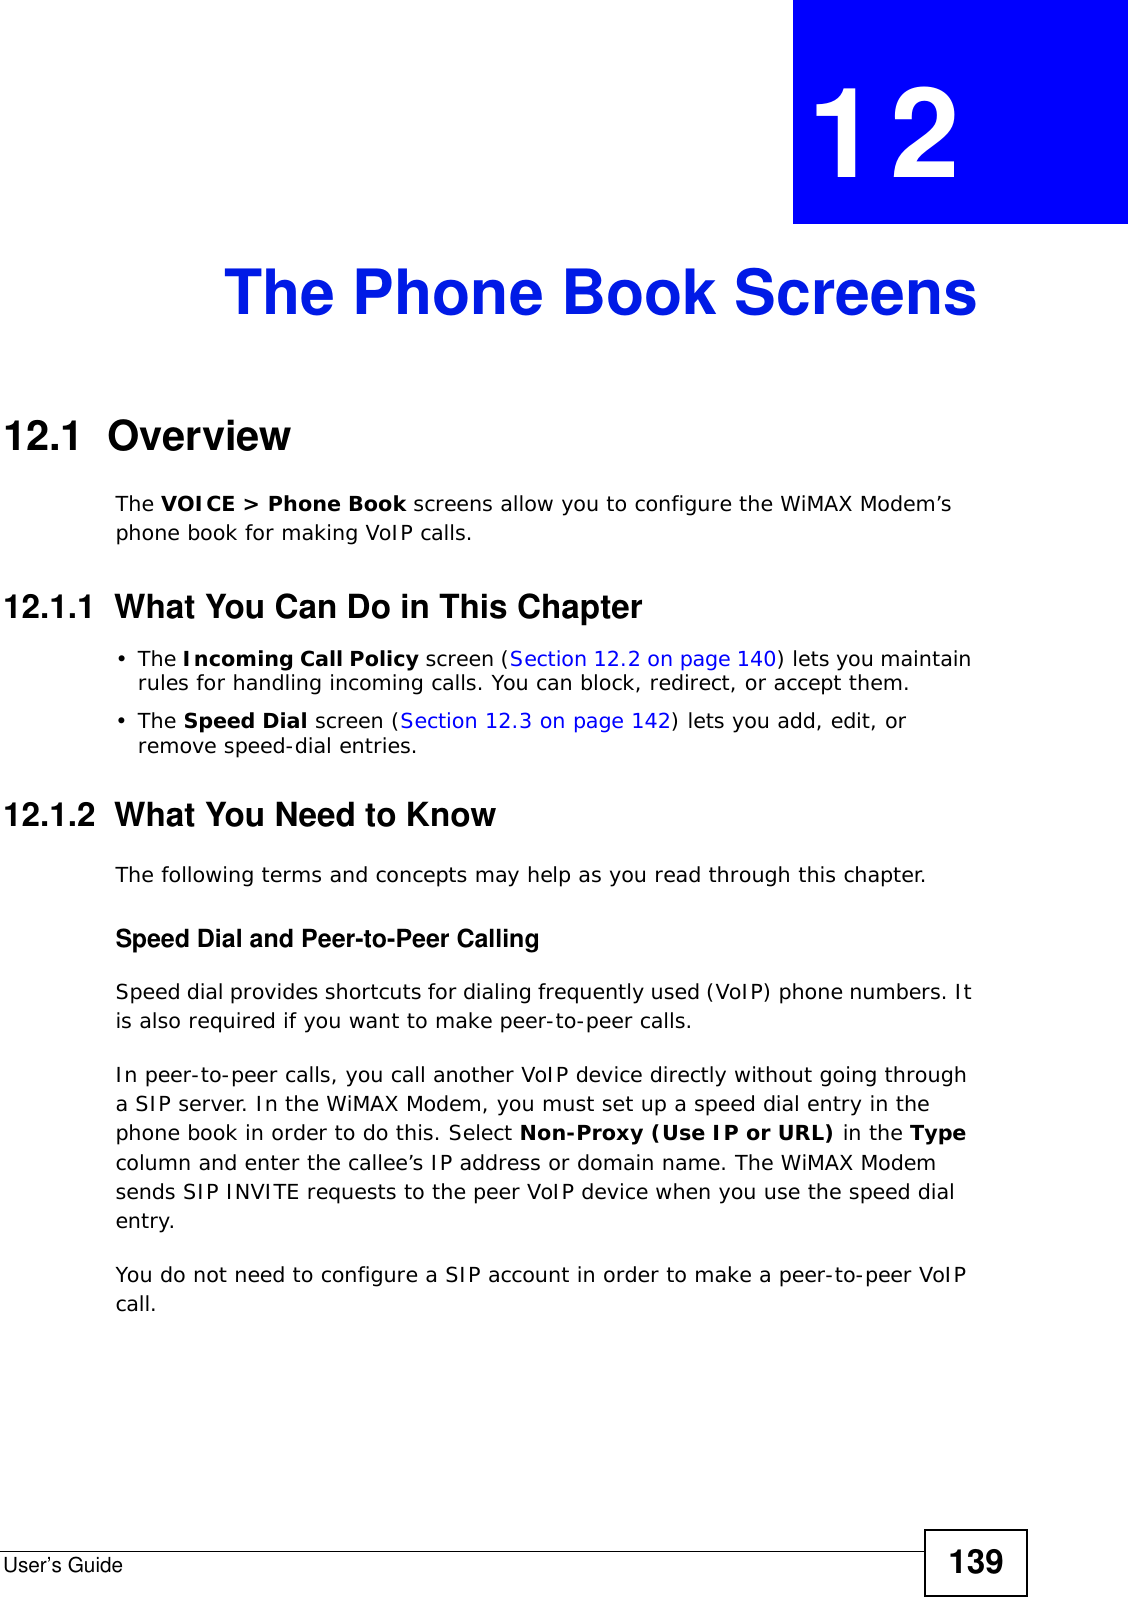 User’s Guide 139CHAPTER  12 The Phone Book Screens12.1  OverviewThe VOICE &gt; Phone Book screens allow you to configure the WiMAX Modem’s phone book for making VoIP calls.12.1.1  What You Can Do in This Chapter•The Incoming Call Policy screen (Section 12.2 on page 140) lets you maintain rules for handling incoming calls. You can block, redirect, or accept them.•The Speed Dial screen (Section 12.3 on page 142) lets you add, edit, or remove speed-dial entries.12.1.2  What You Need to KnowThe following terms and concepts may help as you read through this chapter.Speed Dial and Peer-to-Peer CallingSpeed dial provides shortcuts for dialing frequently used (VoIP) phone numbers. It is also required if you want to make peer-to-peer calls. In peer-to-peer calls, you call another VoIP device directly without going through a SIP server. In the WiMAX Modem, you must set up a speed dial entry in the phone book in order to do this. Select Non-Proxy (Use IP or URL) in the Type column and enter the callee’s IP address or domain name. The WiMAX Modem sends SIP INVITE requests to the peer VoIP device when you use the speed dial entry.You do not need to configure a SIP account in order to make a peer-to-peer VoIP call.